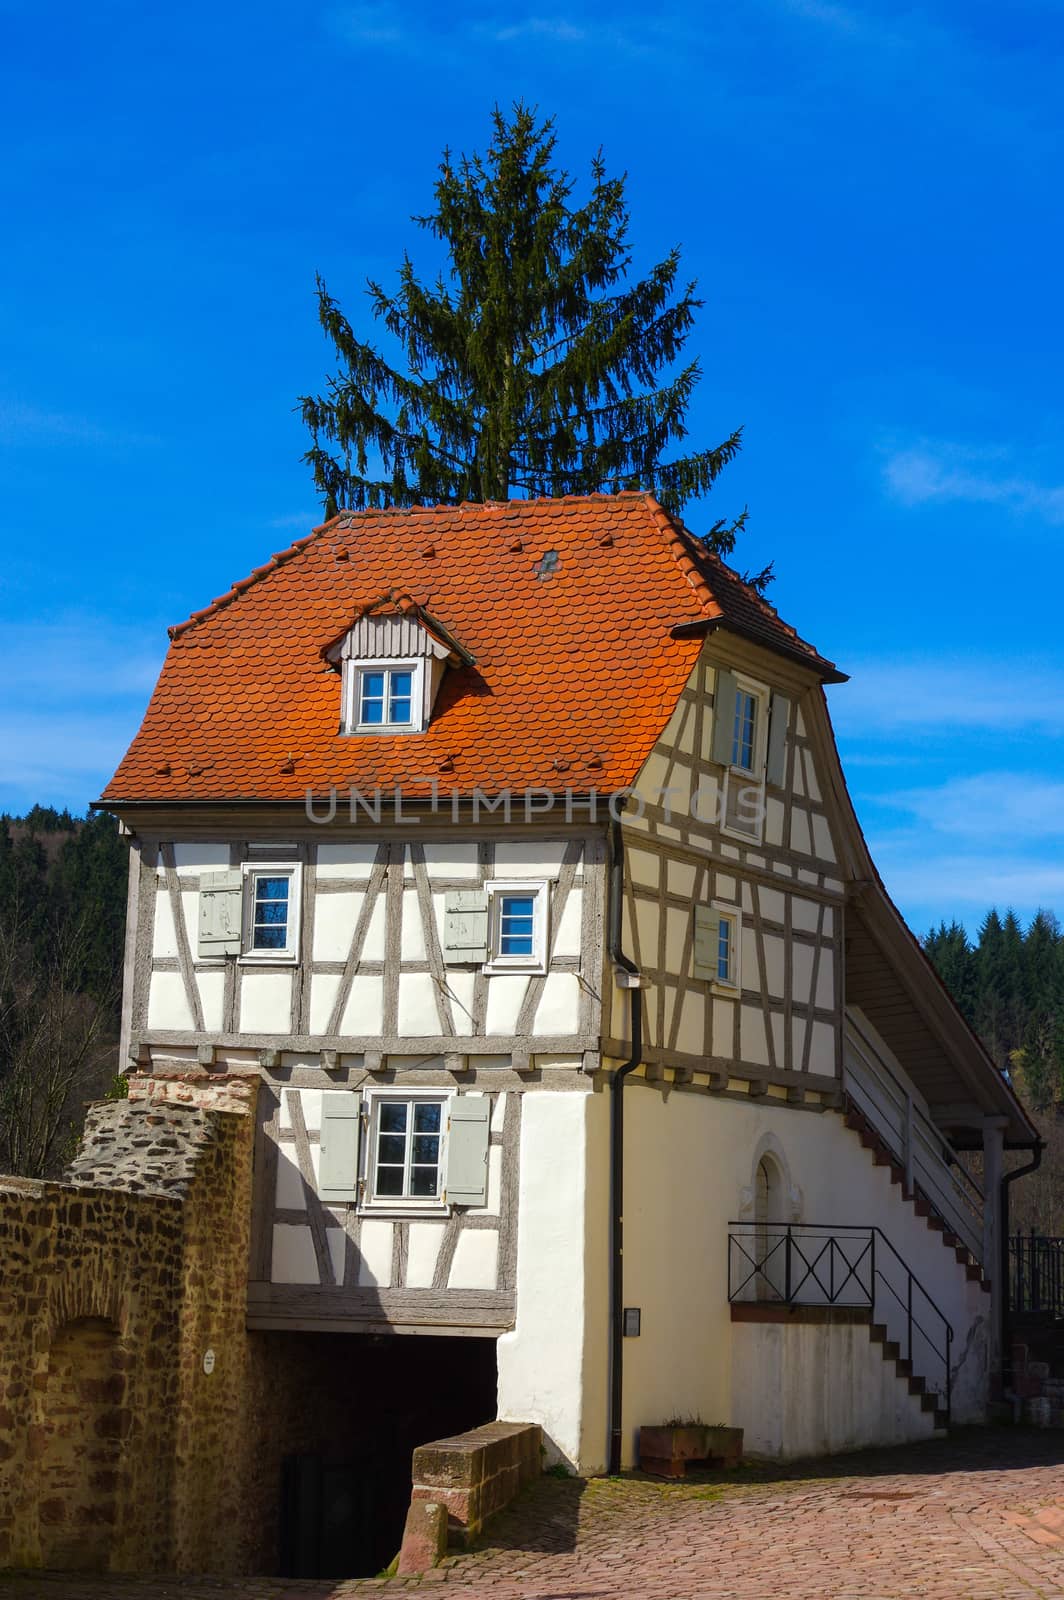 Residential tudor style house with blue sky in background by evolutionnow